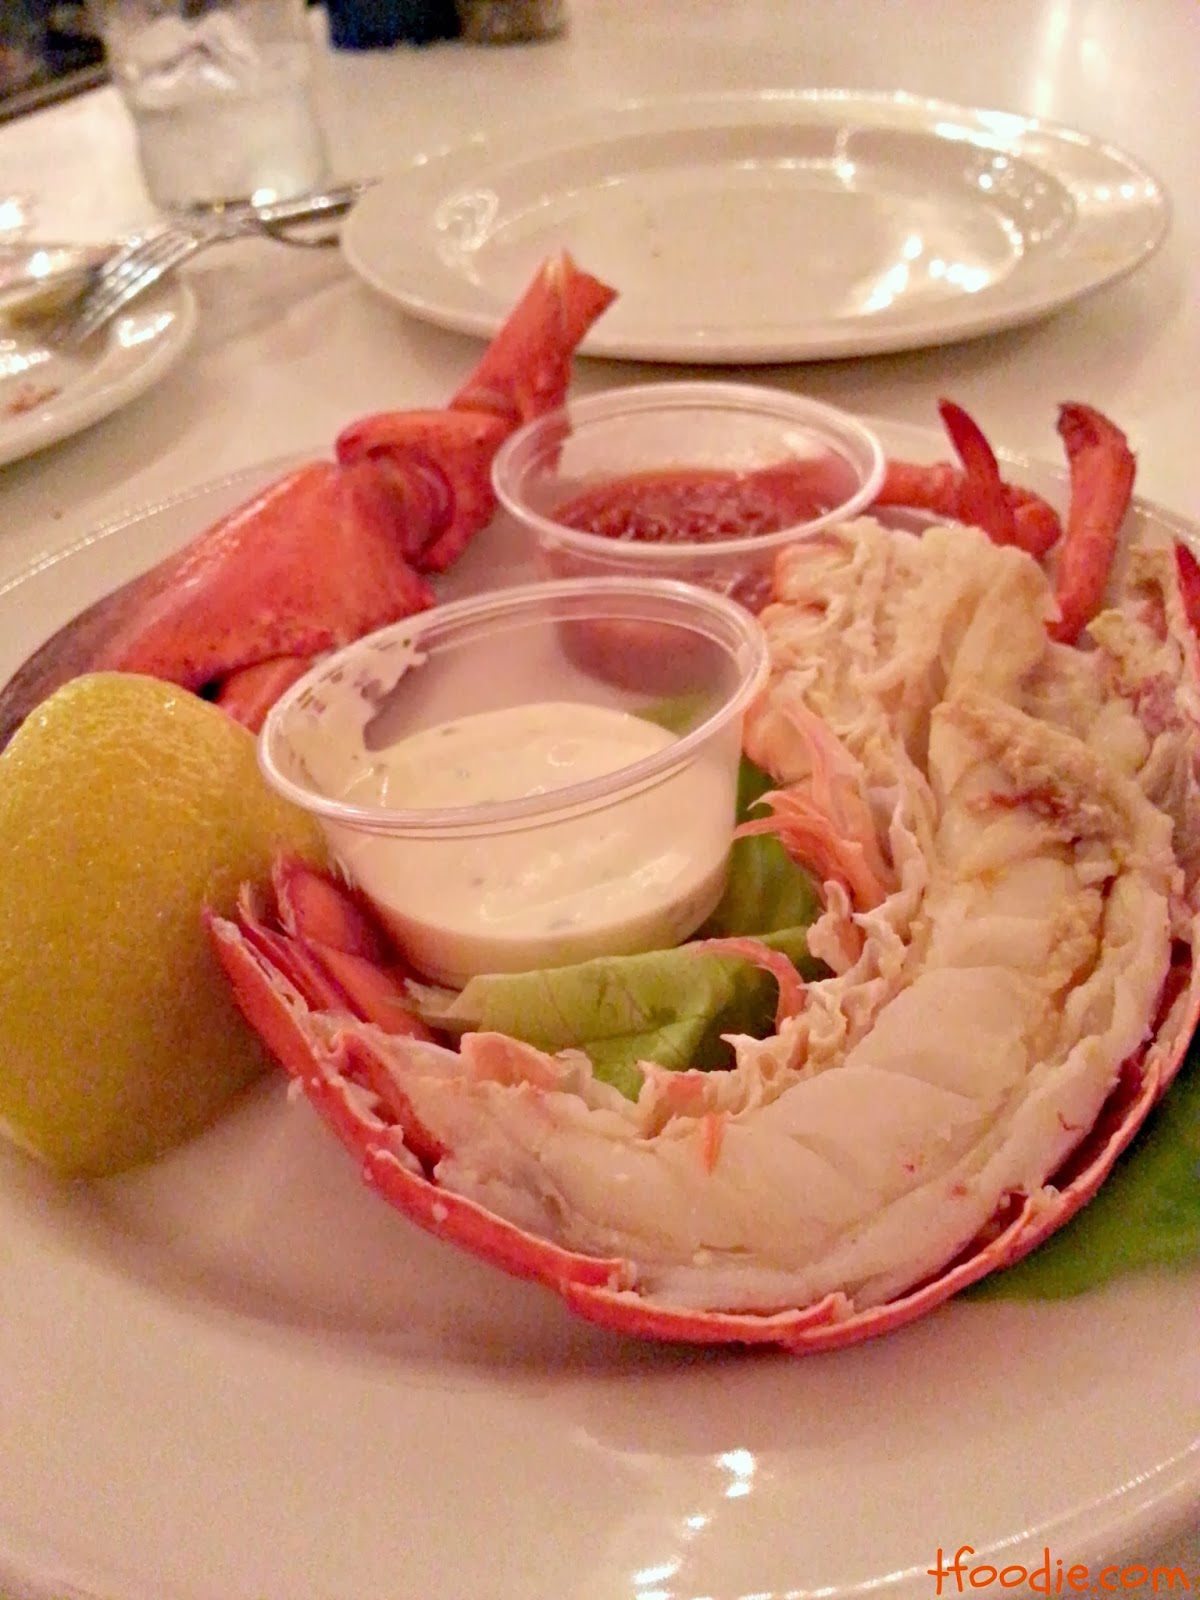 The traveling foodie: Grand Central Oyster Bar & Restaurant